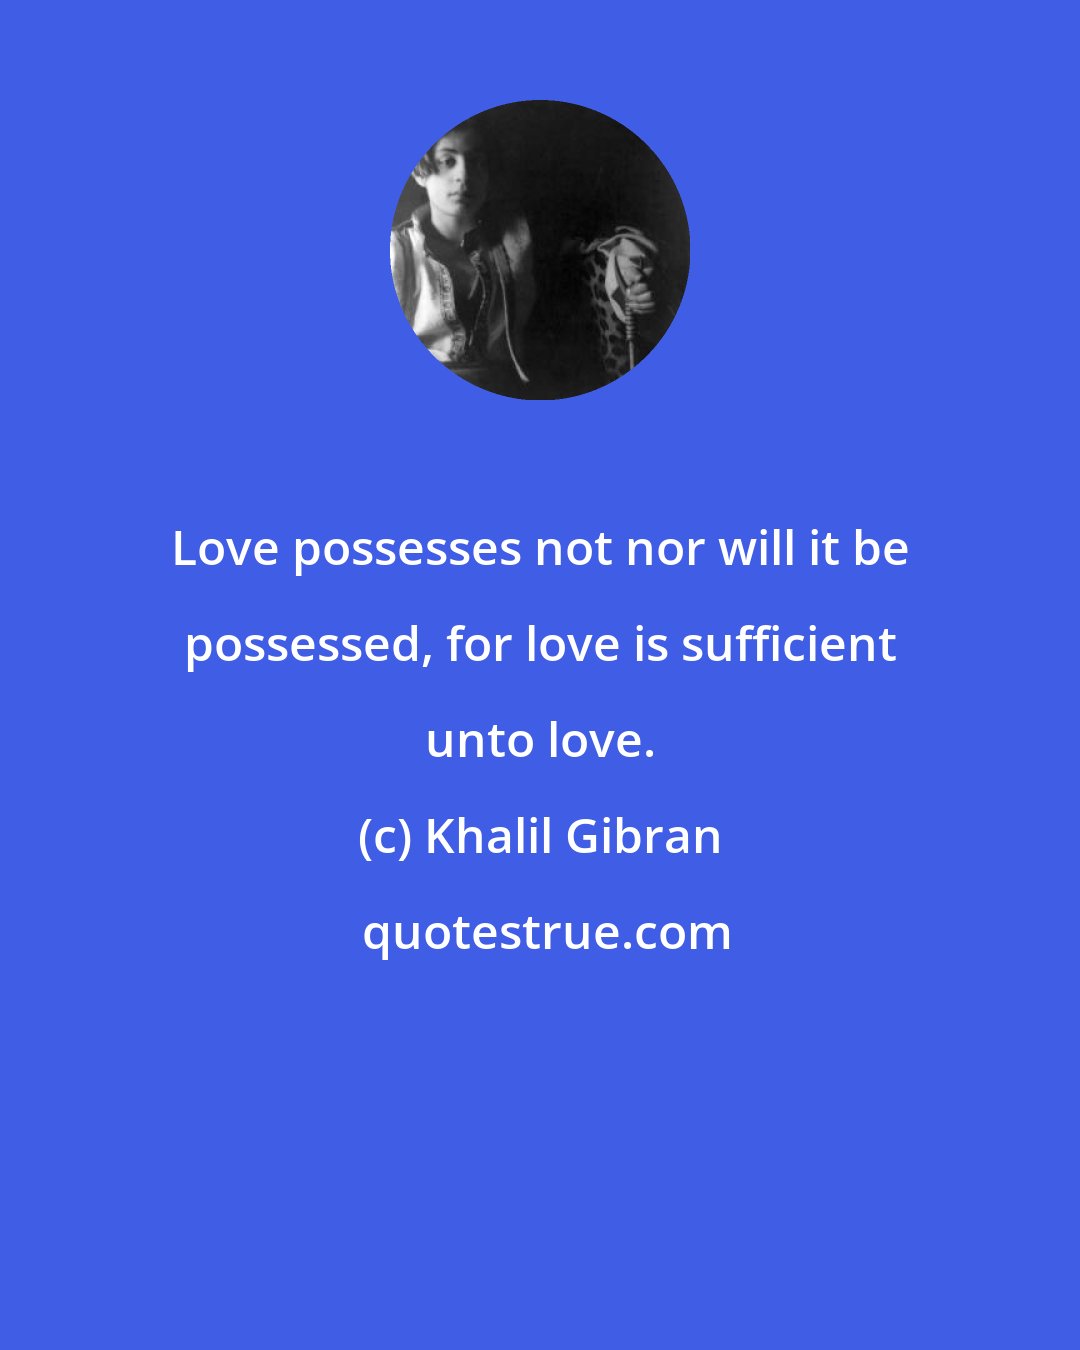 Khalil Gibran: Love possesses not nor will it be possessed, for love is sufficient unto love.